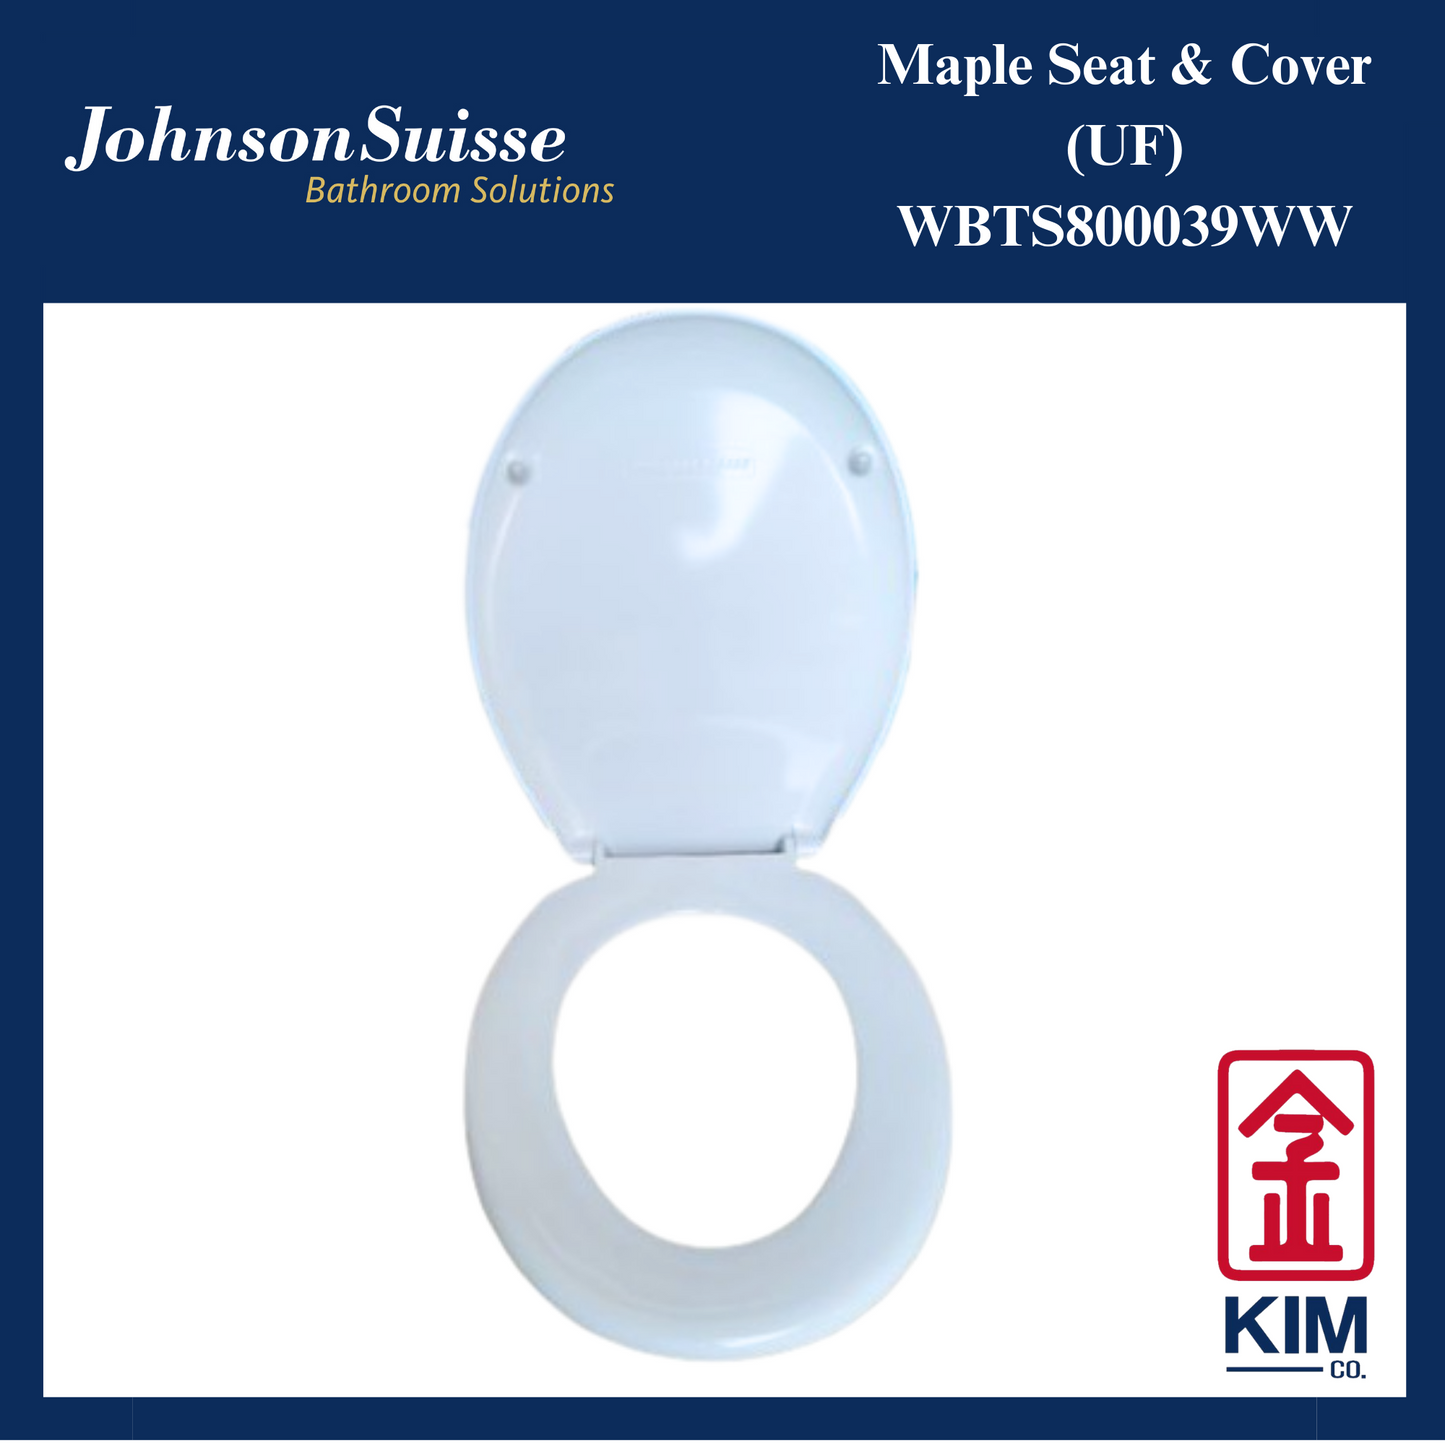 Johnson Suisse Maple Seat & Covers (UF)(WBTS800039WW)